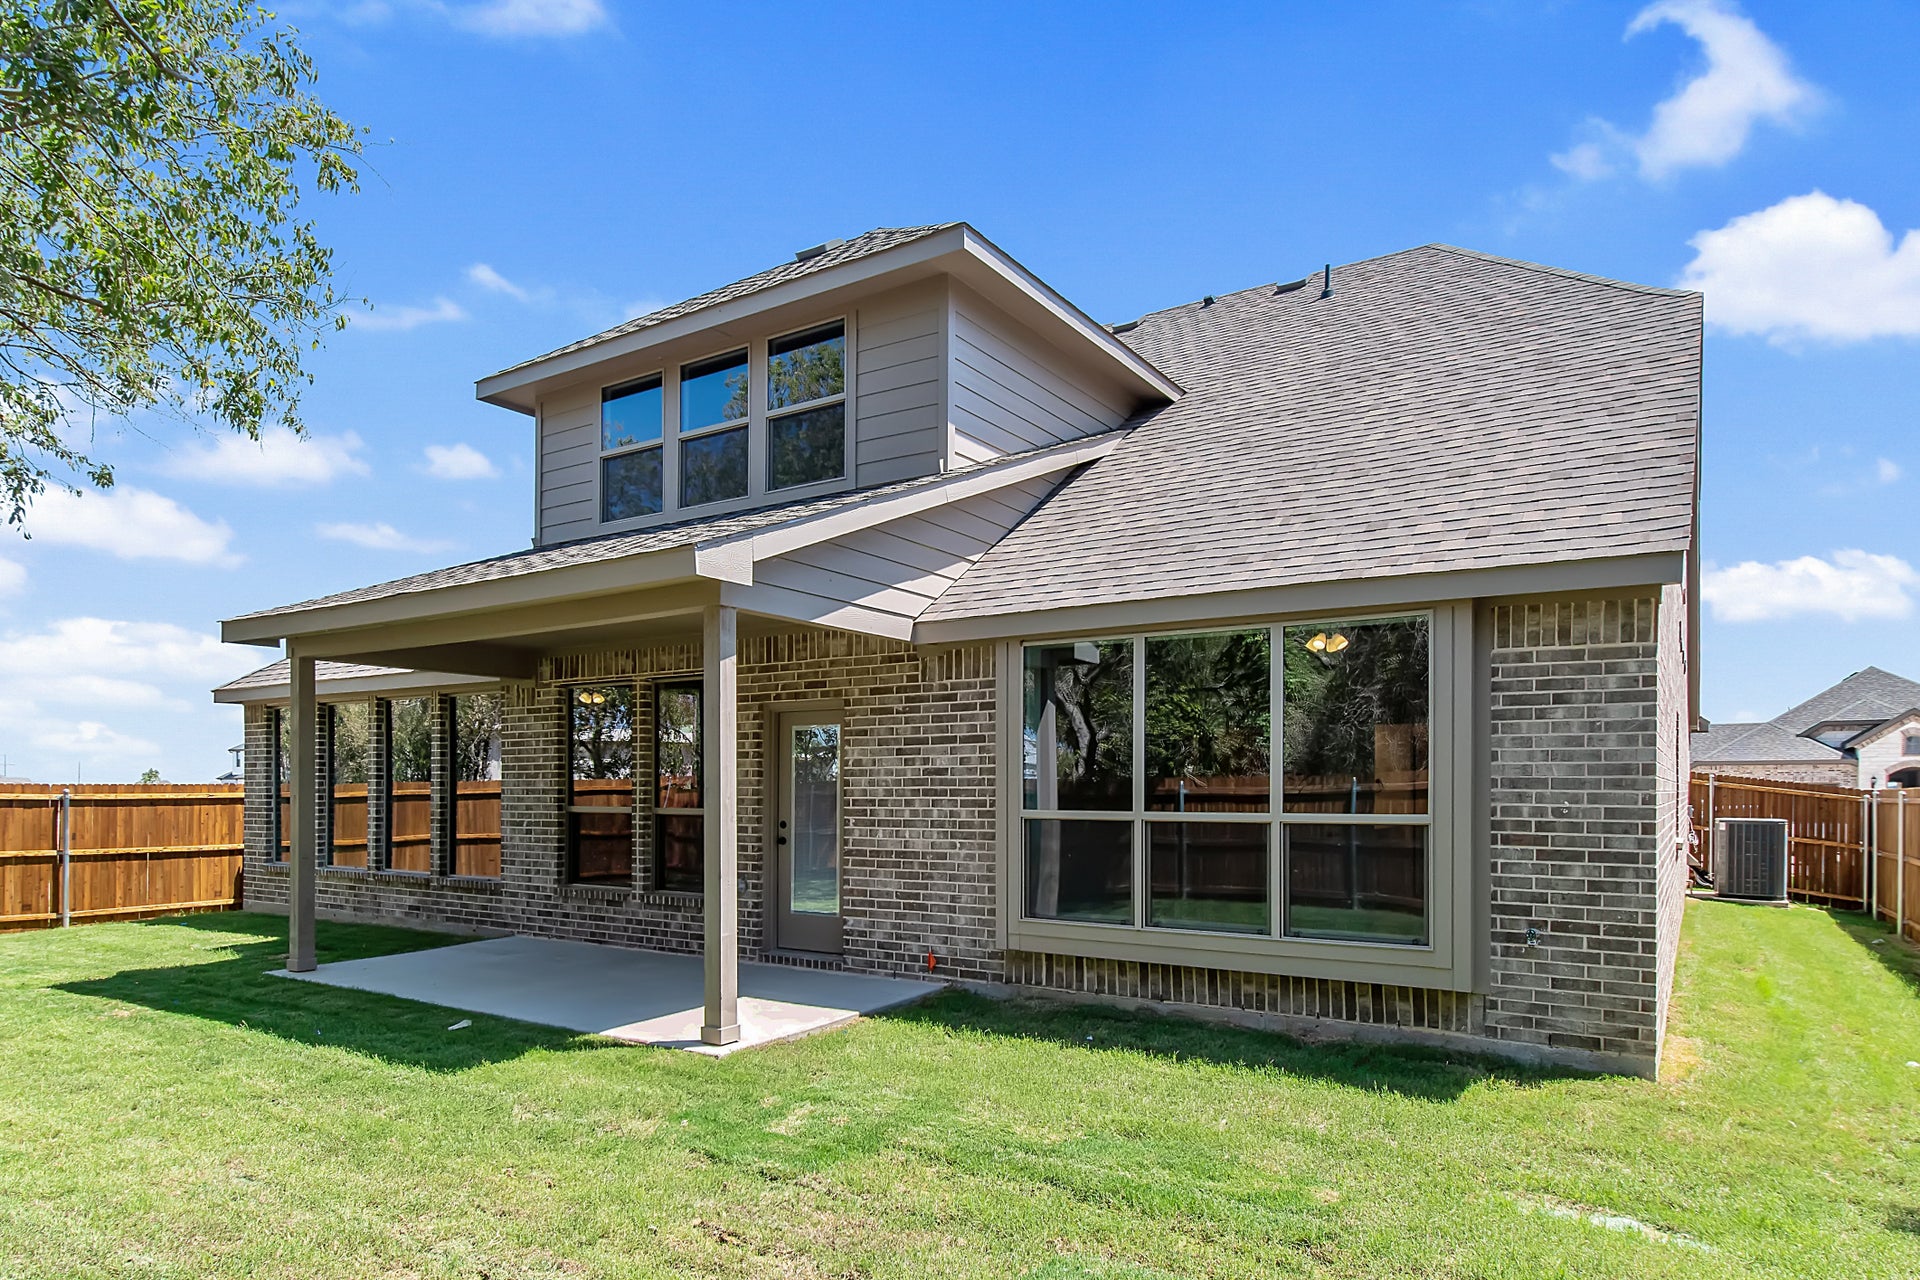 2,972sf New Home in Burleson, TX